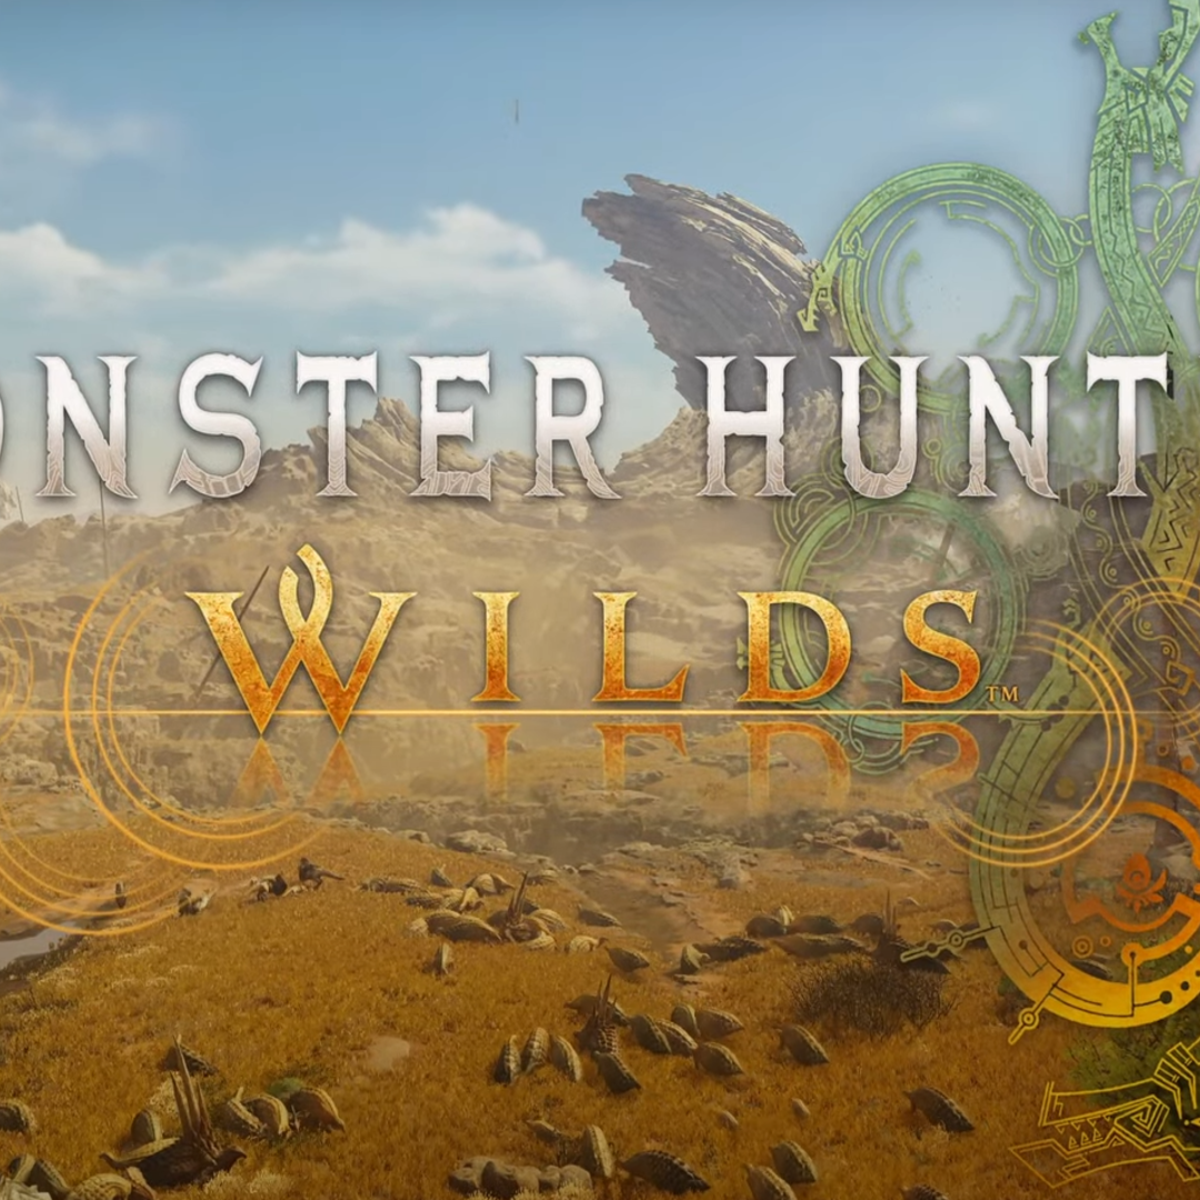 Monster Hunter Wilds is basically World 2, and it comes out in